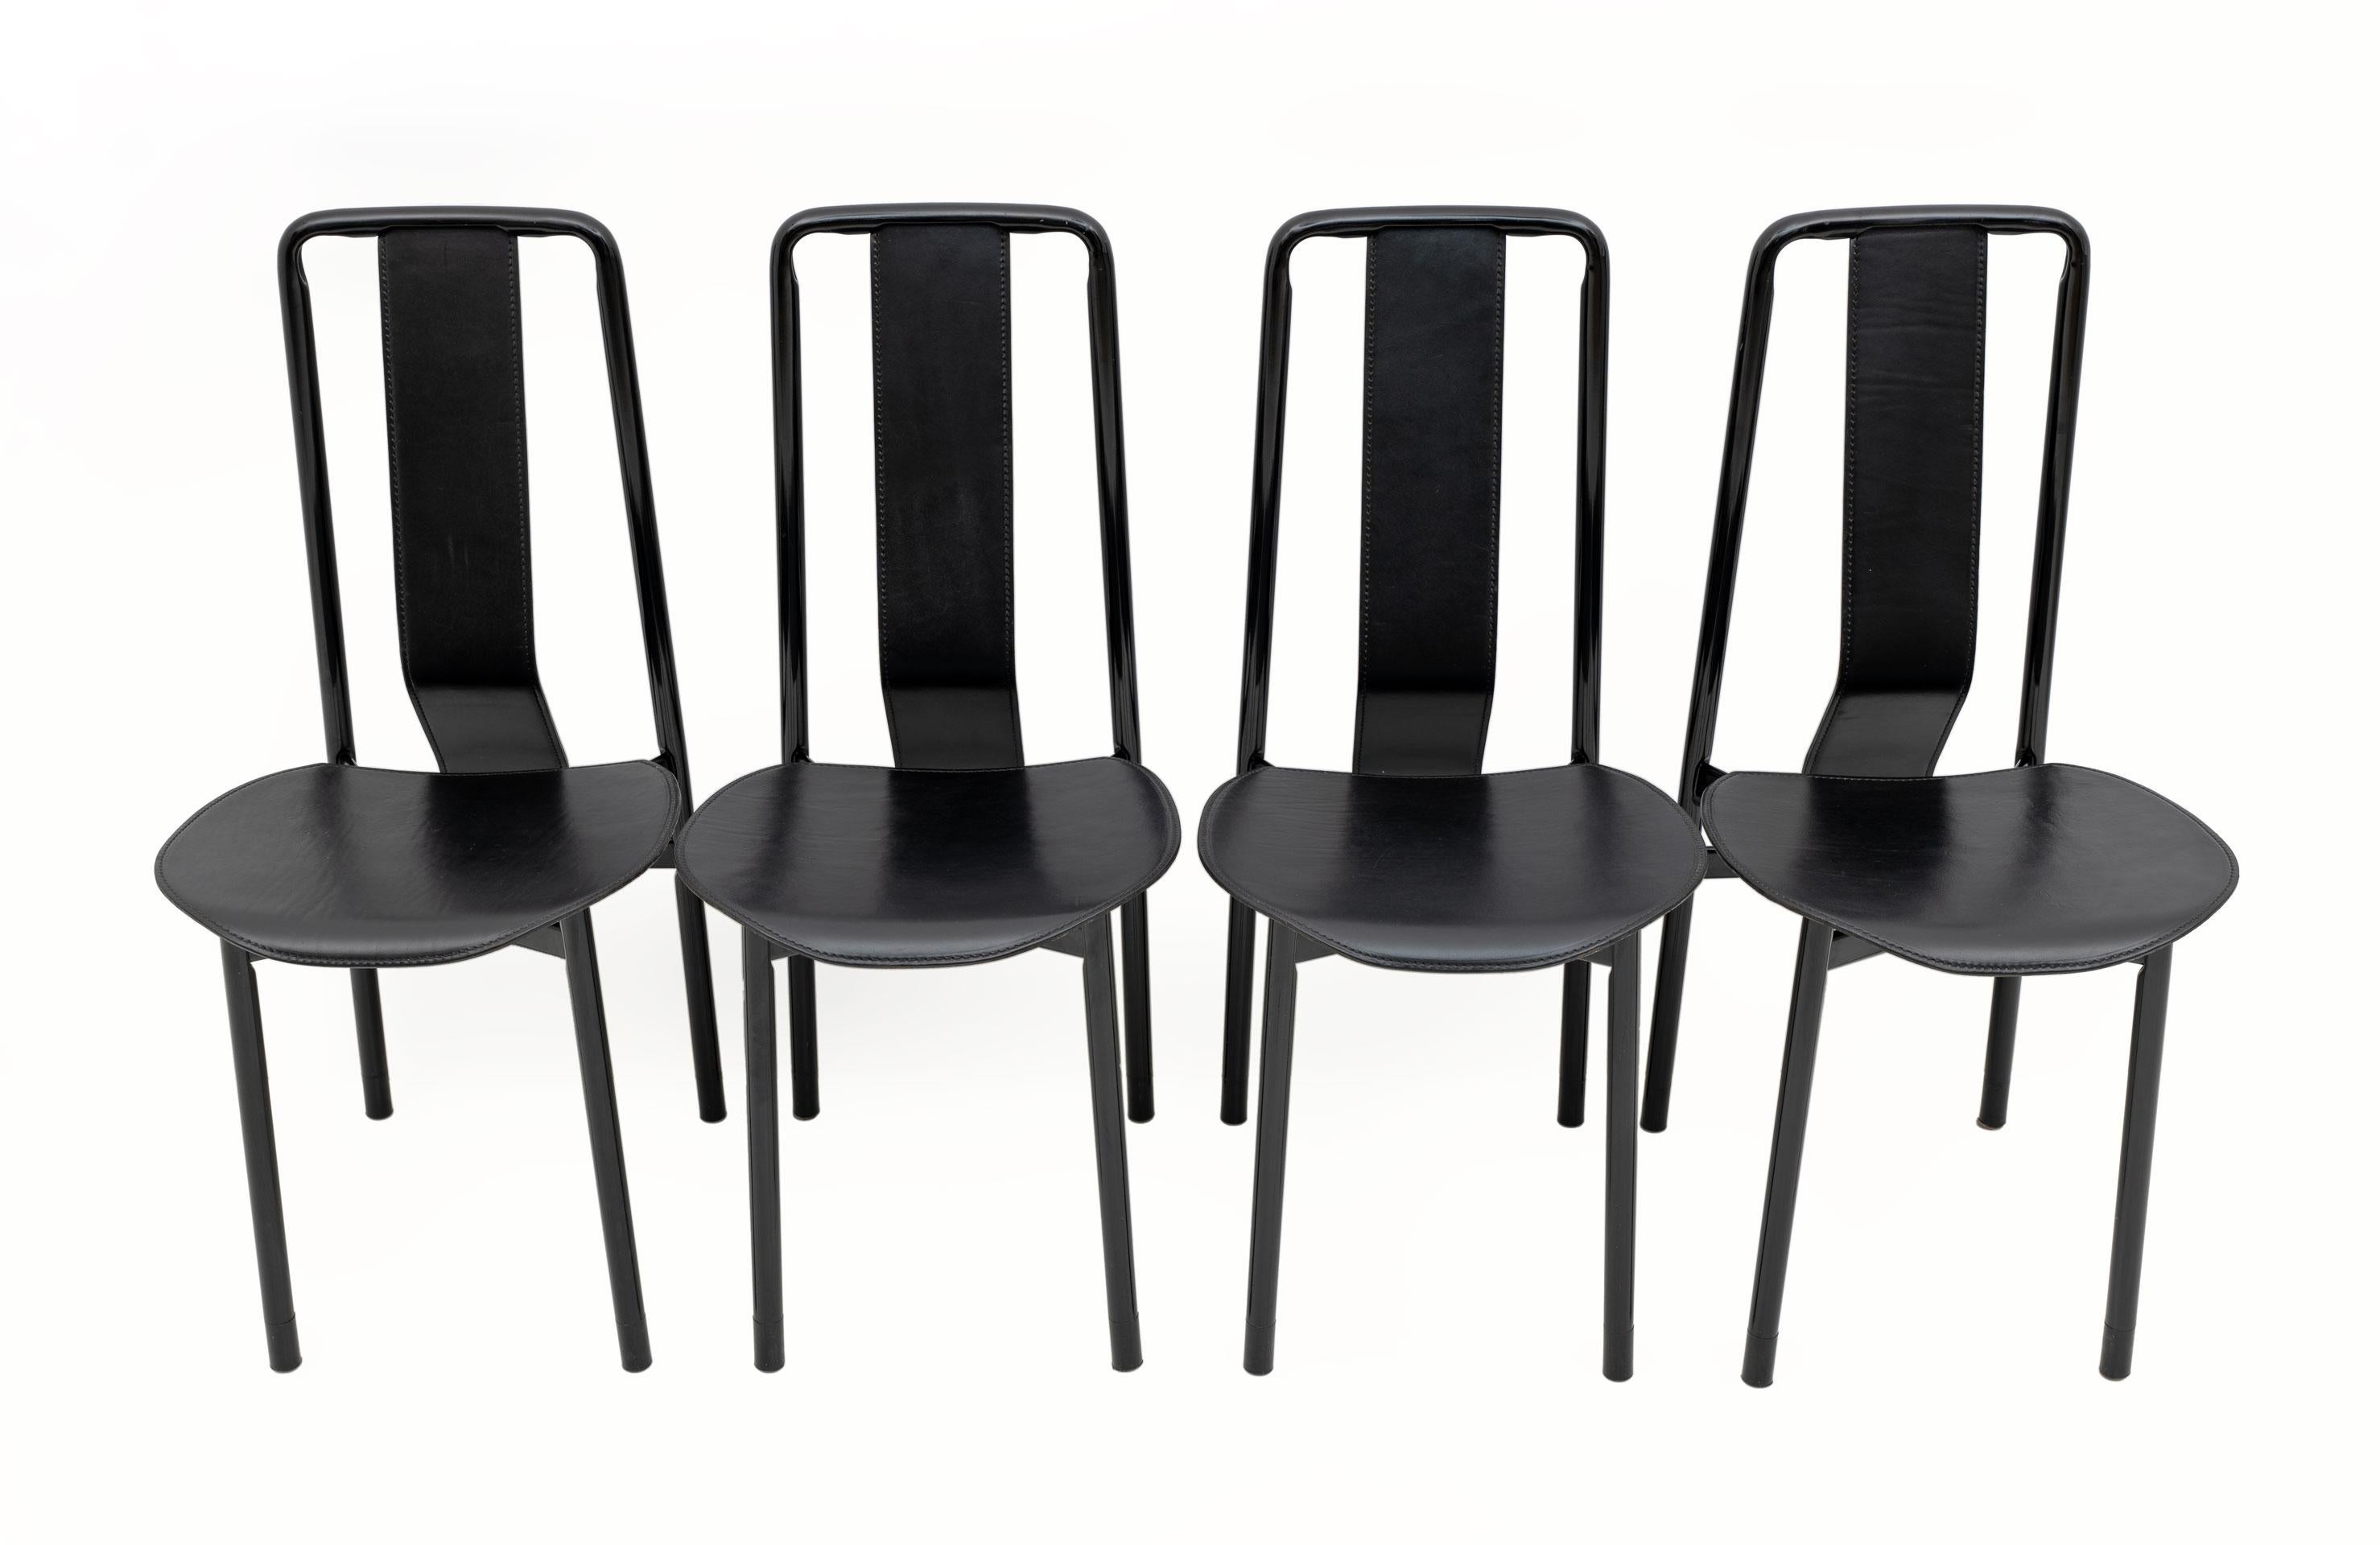 Vintage design dining chairs designed by Achille Castiglioni for Zanotta model Irma. Black lacquered metal structures with leather seats and backs.